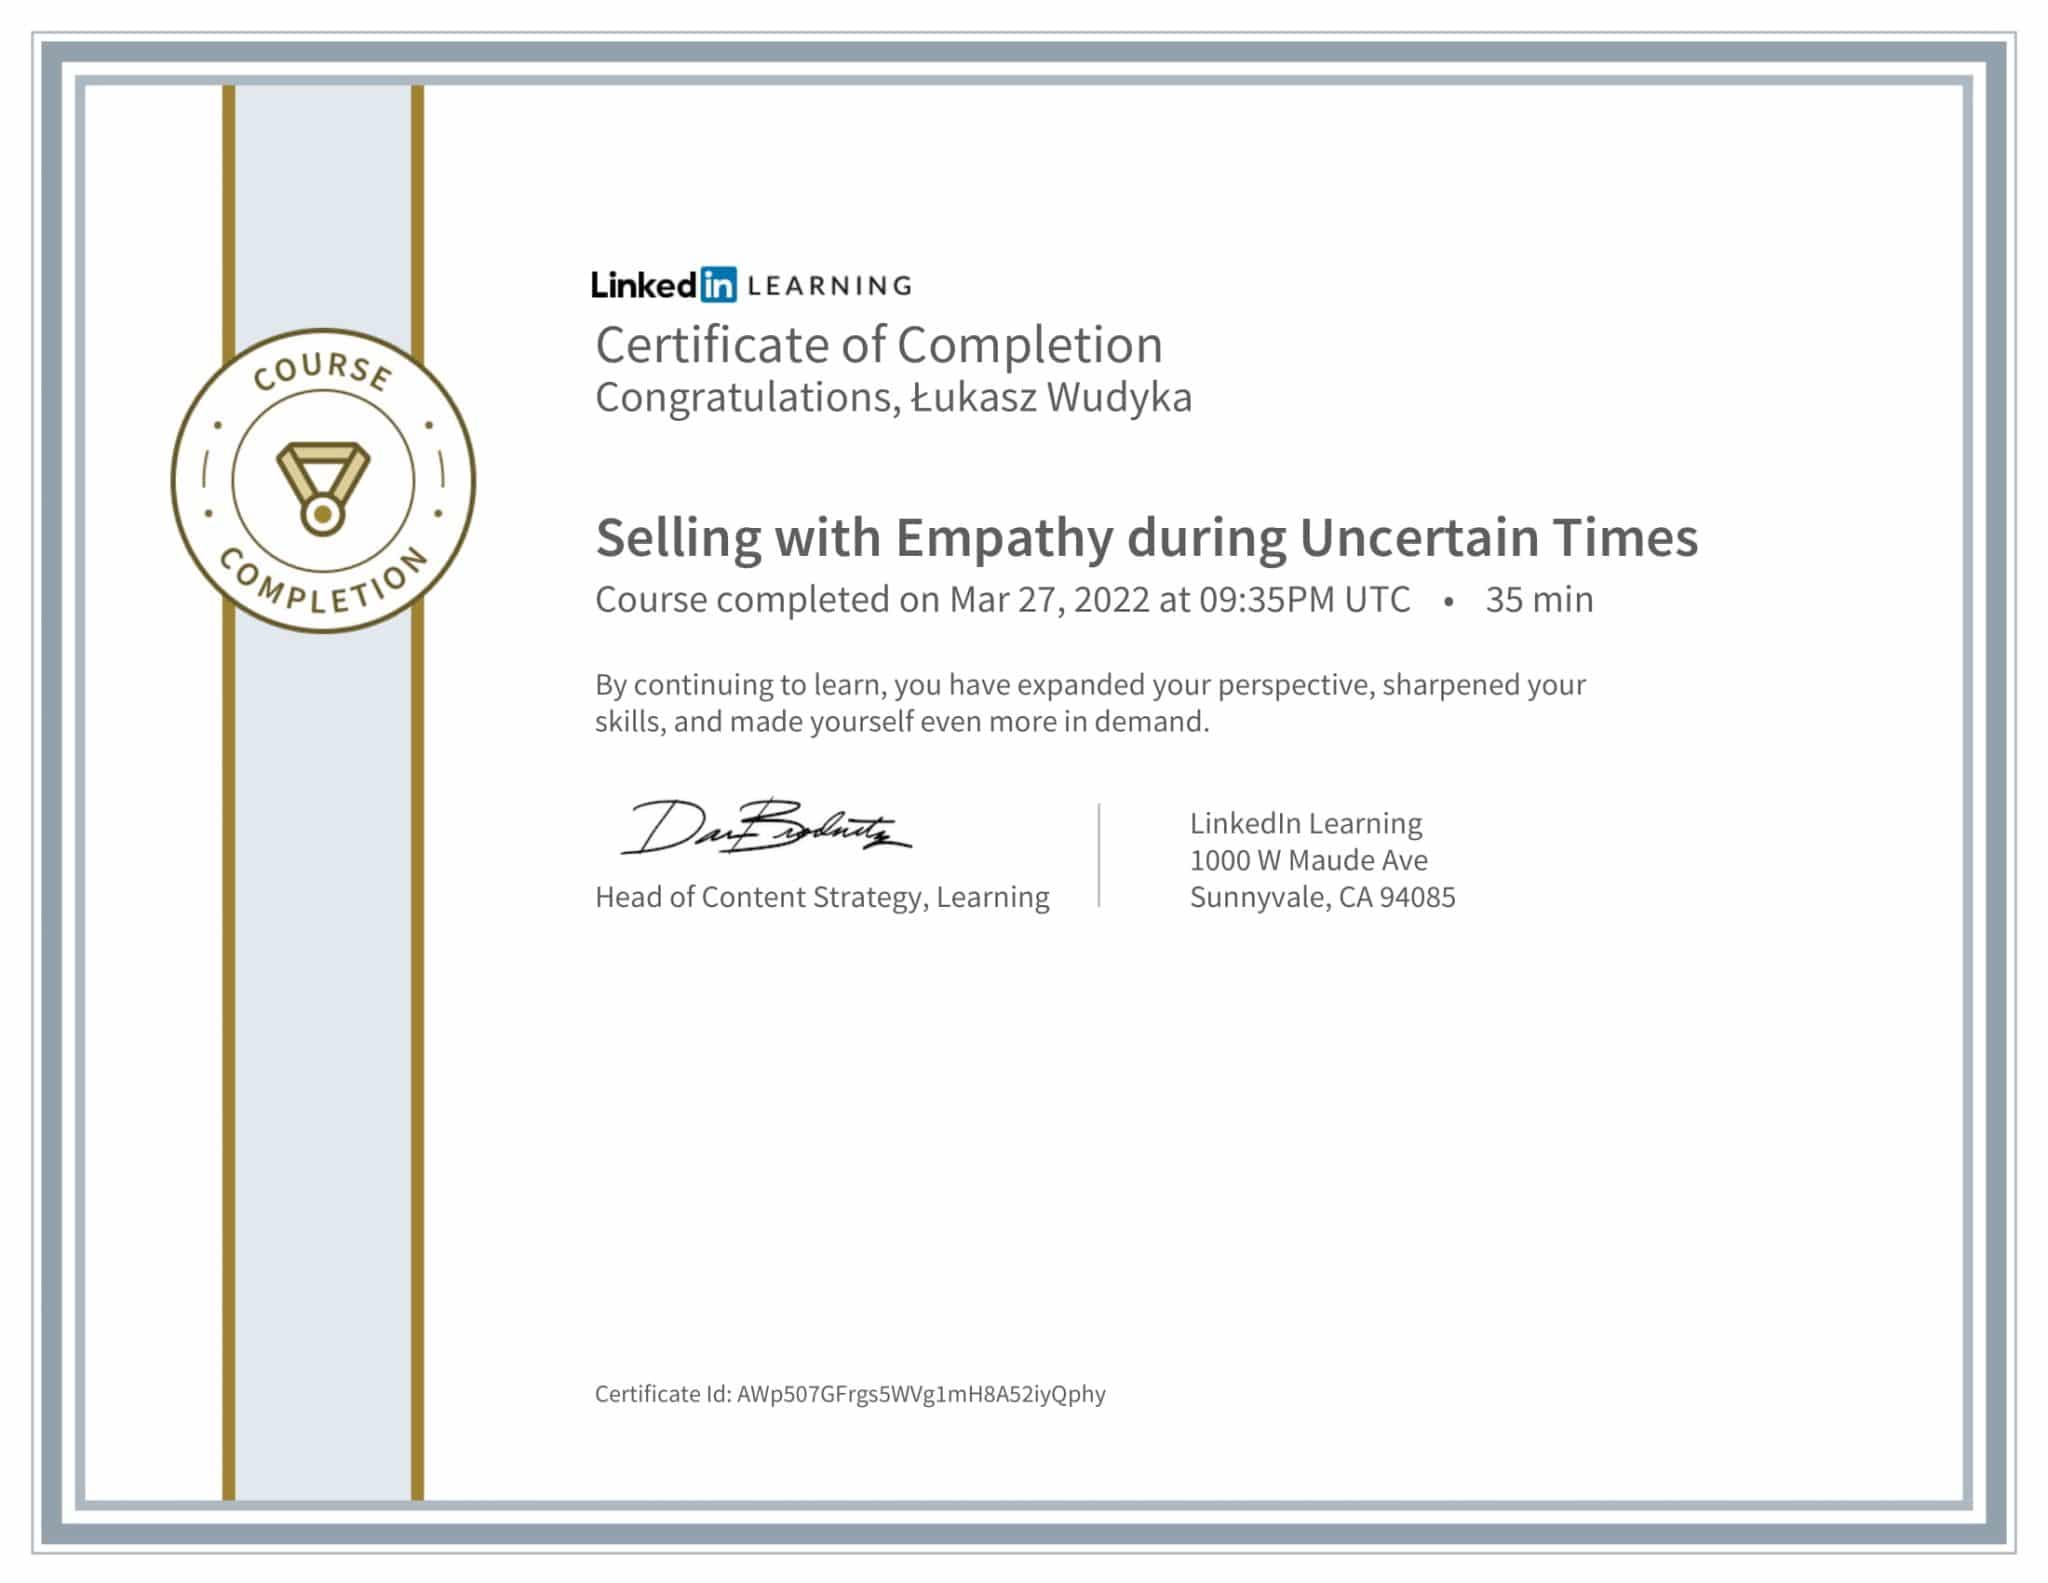 CertificateOfCompletion_Selling with Empathy during Uncertain Times-1